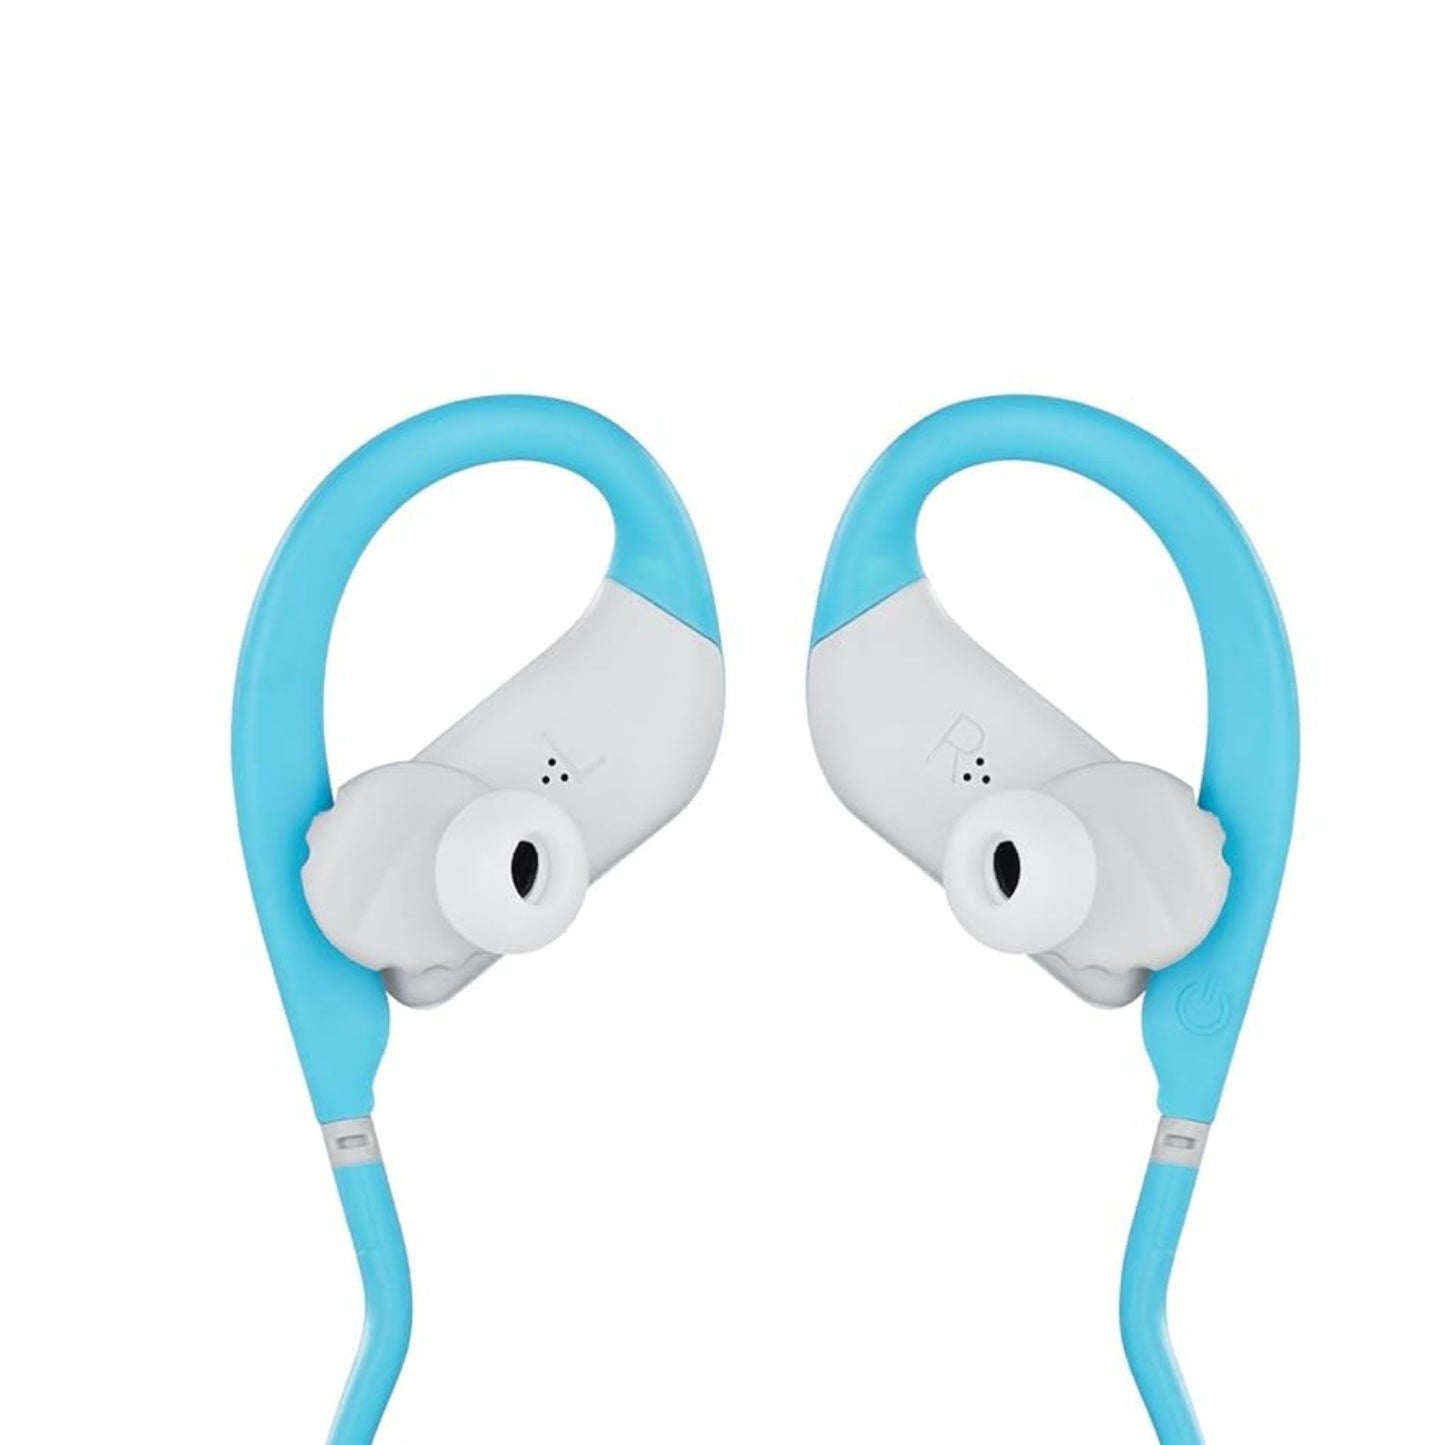 JBL Endurance JUMP  Waterproof Wireless Sport in Ear Headphones with One Touch Remote Teal